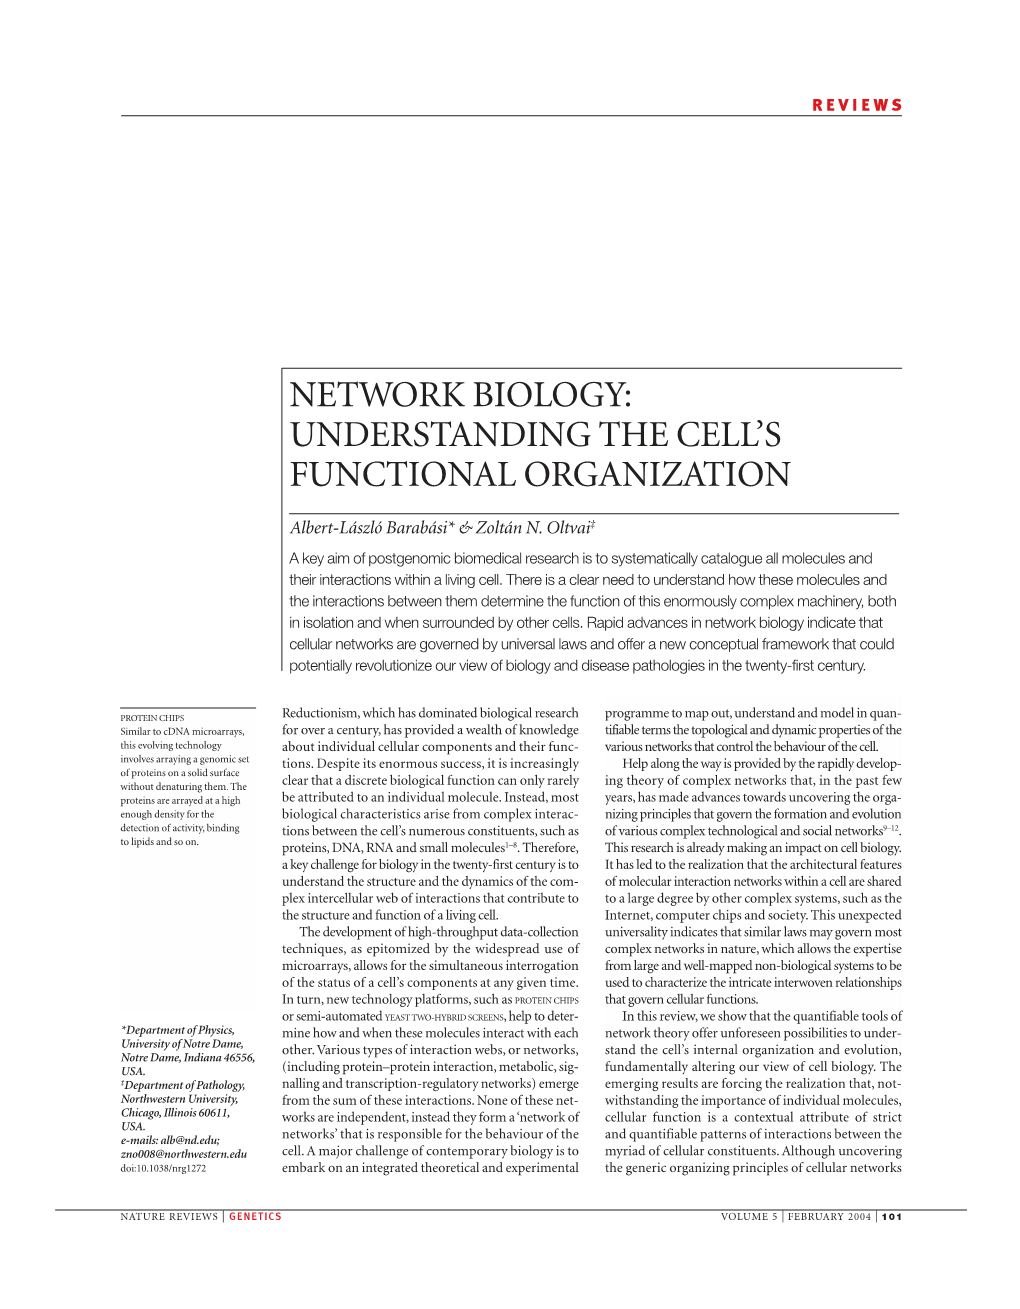 Network Biology: Understanding the Cell's